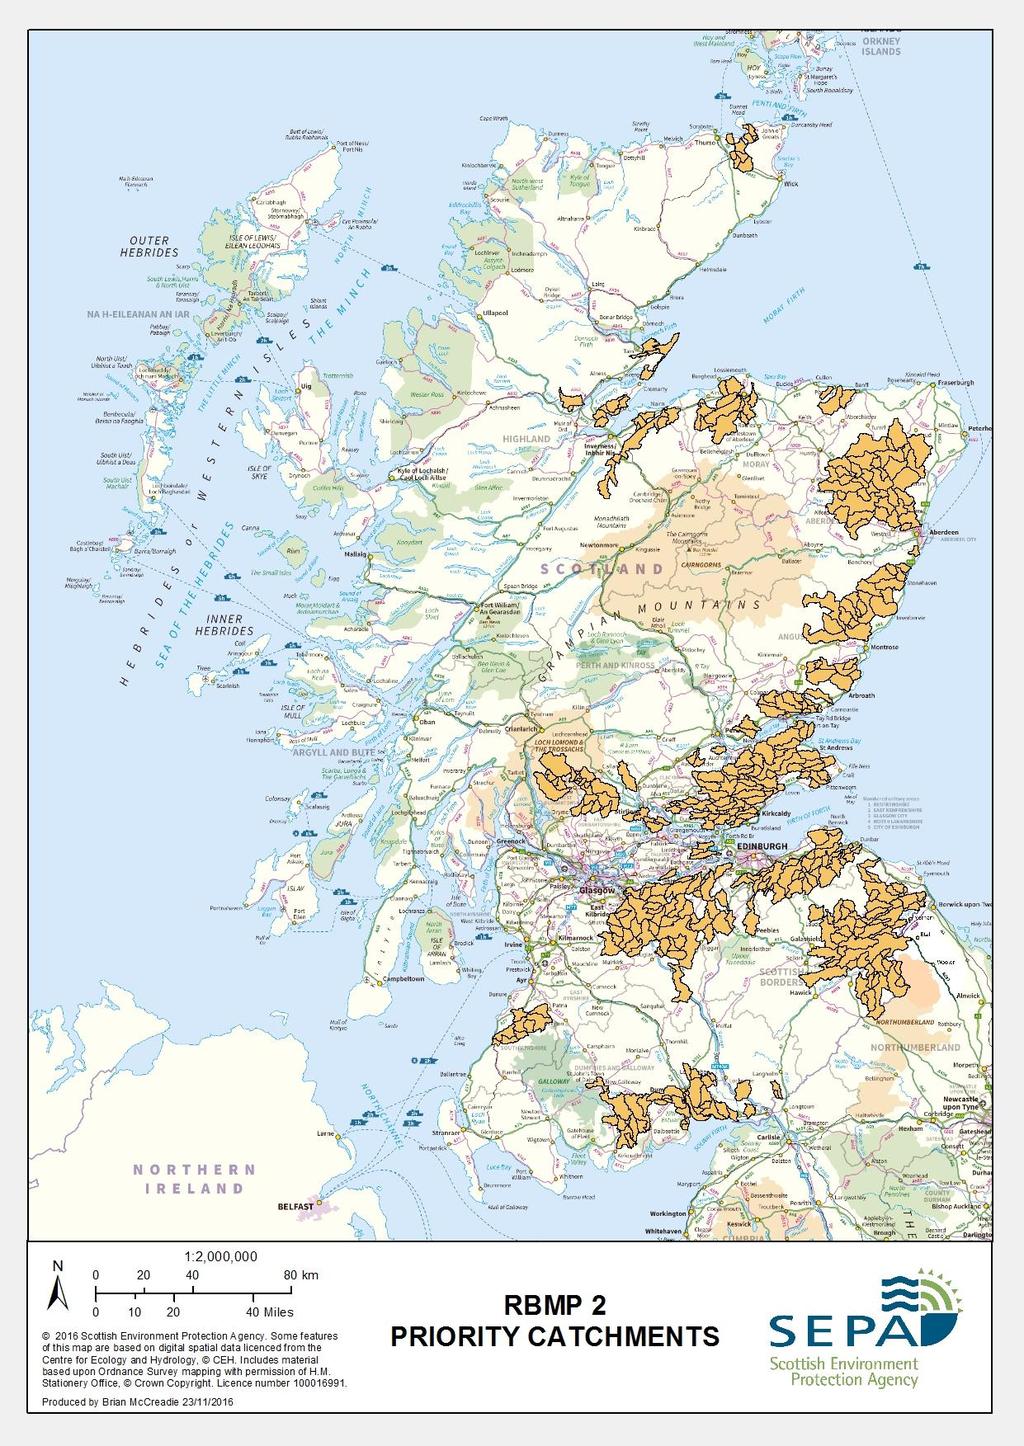 Map 2: RBMP 2 Priority Catchments Who is doing what? SEPA will be responsible for planning and undertaking the inspection programme for each priority catchment.